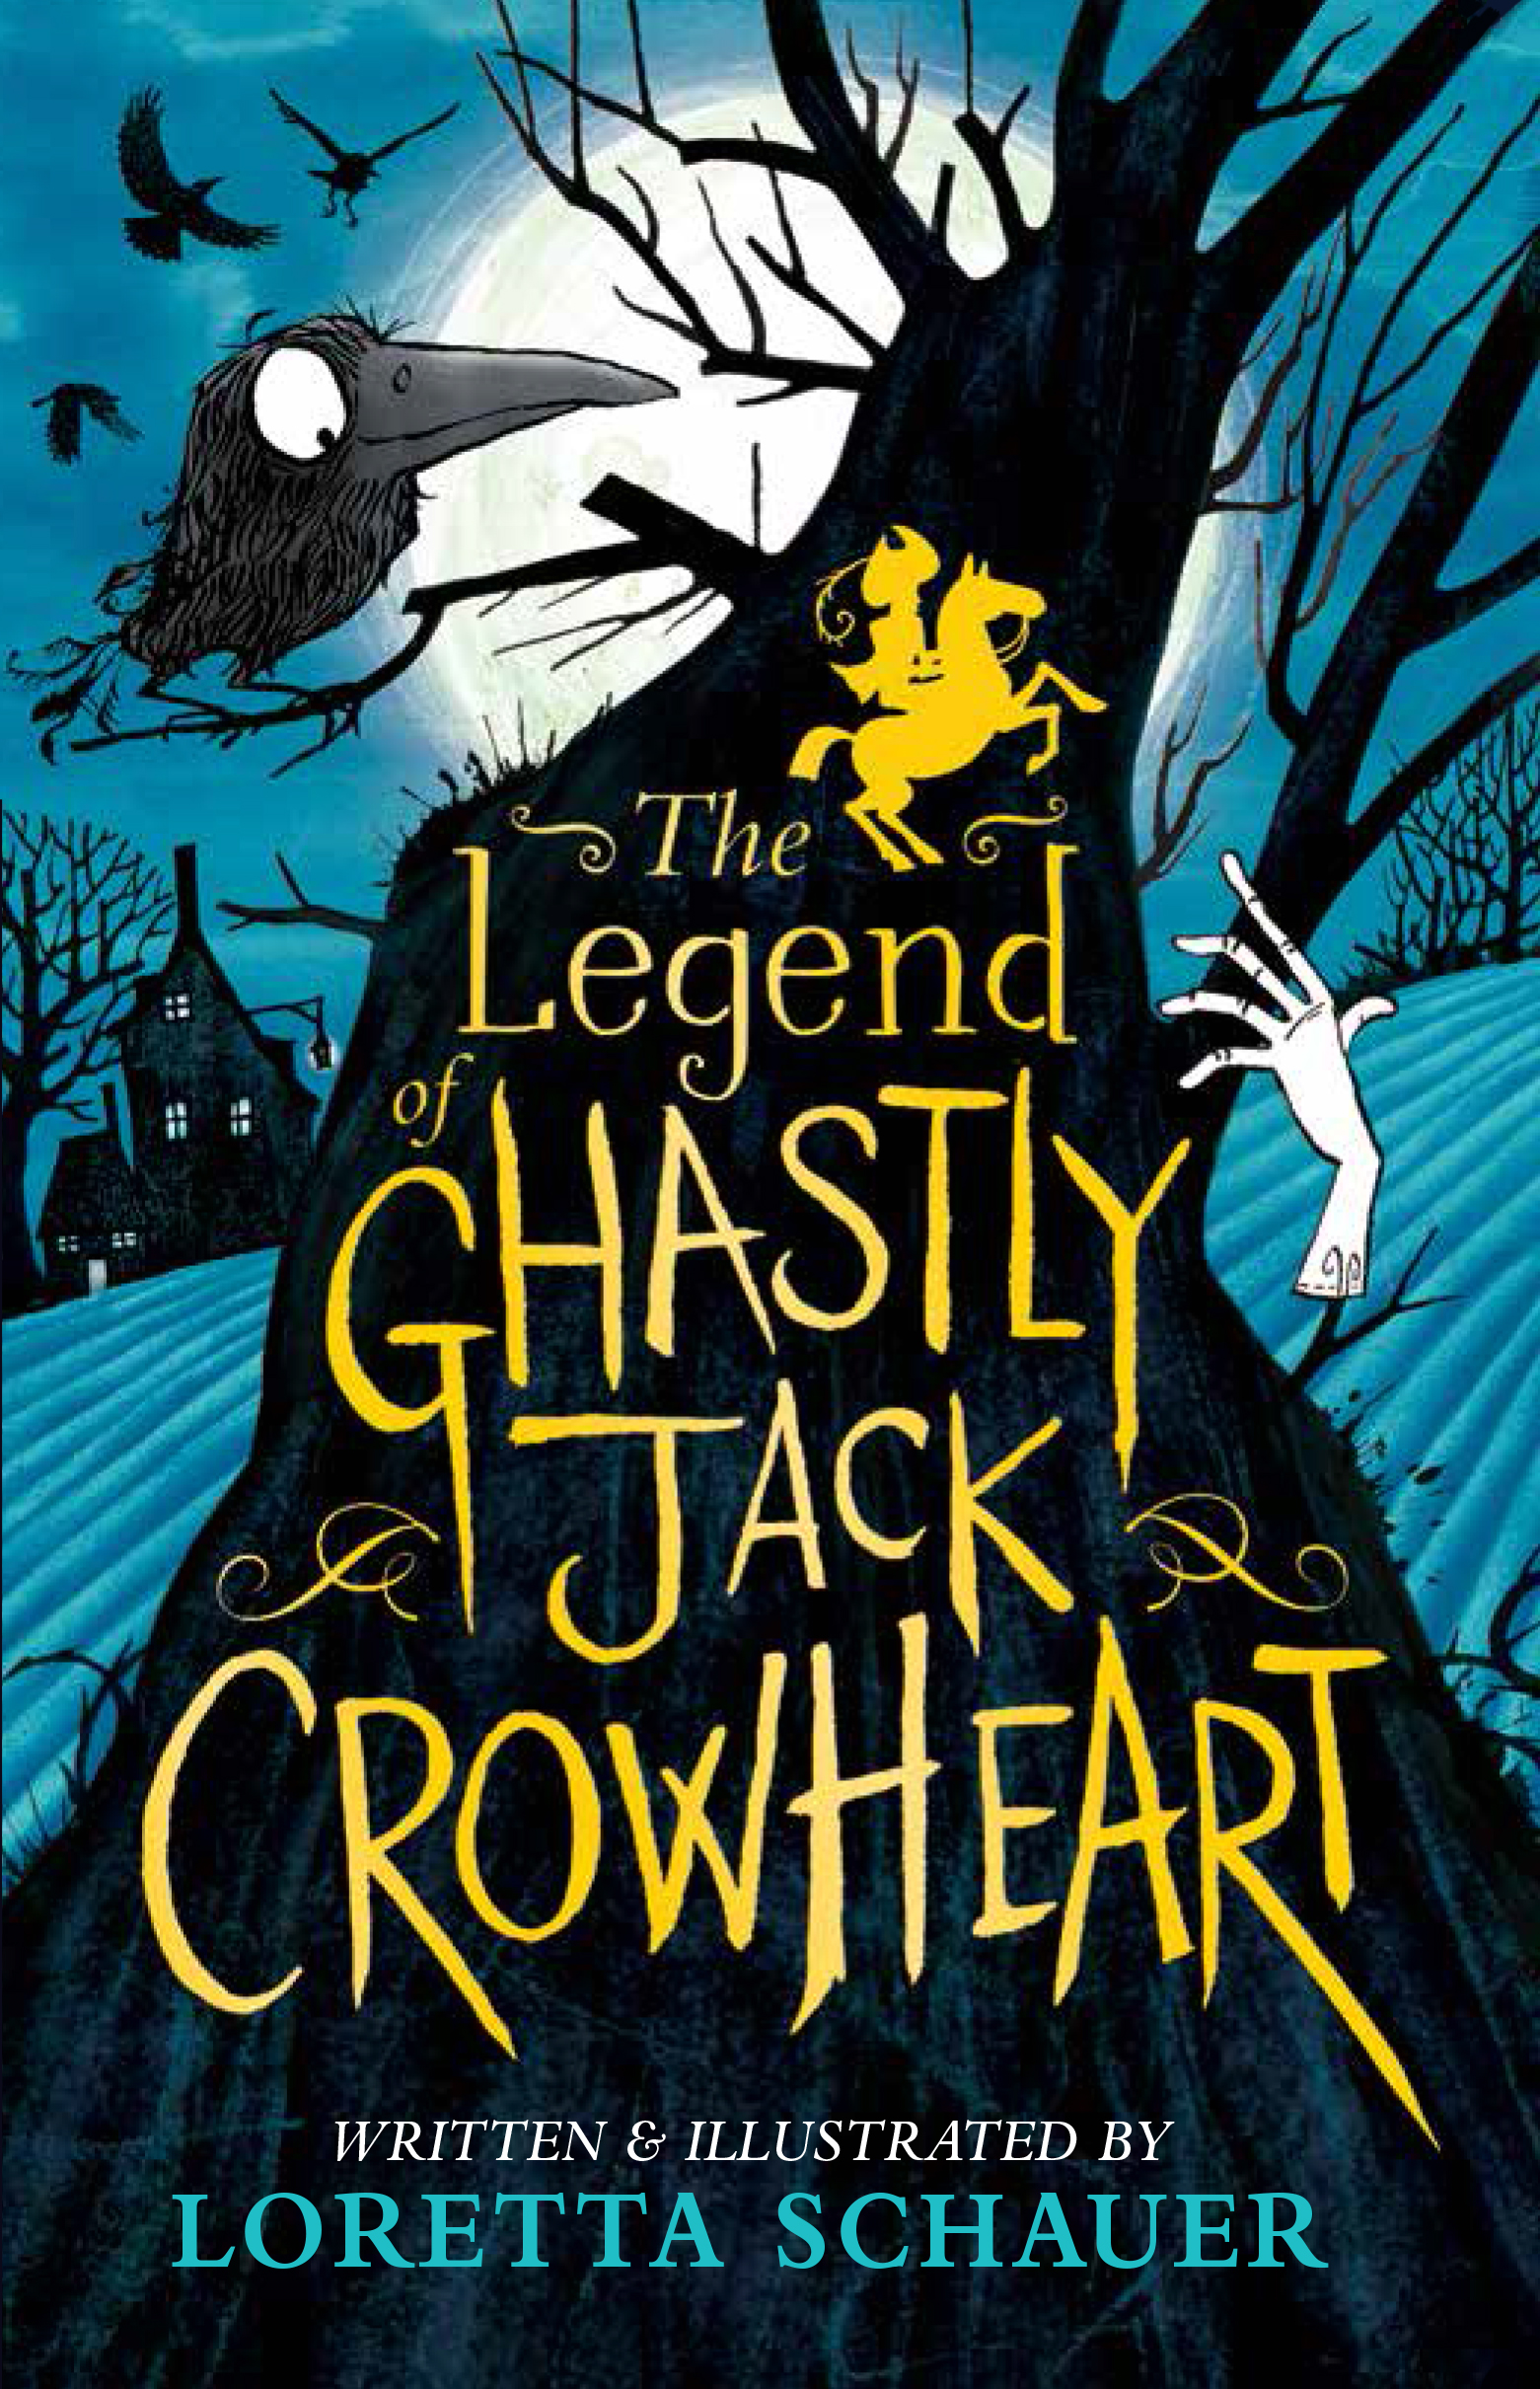 Front cover of 'The Legend of Ghastly Jack Crowheart' by Loretta Schauer